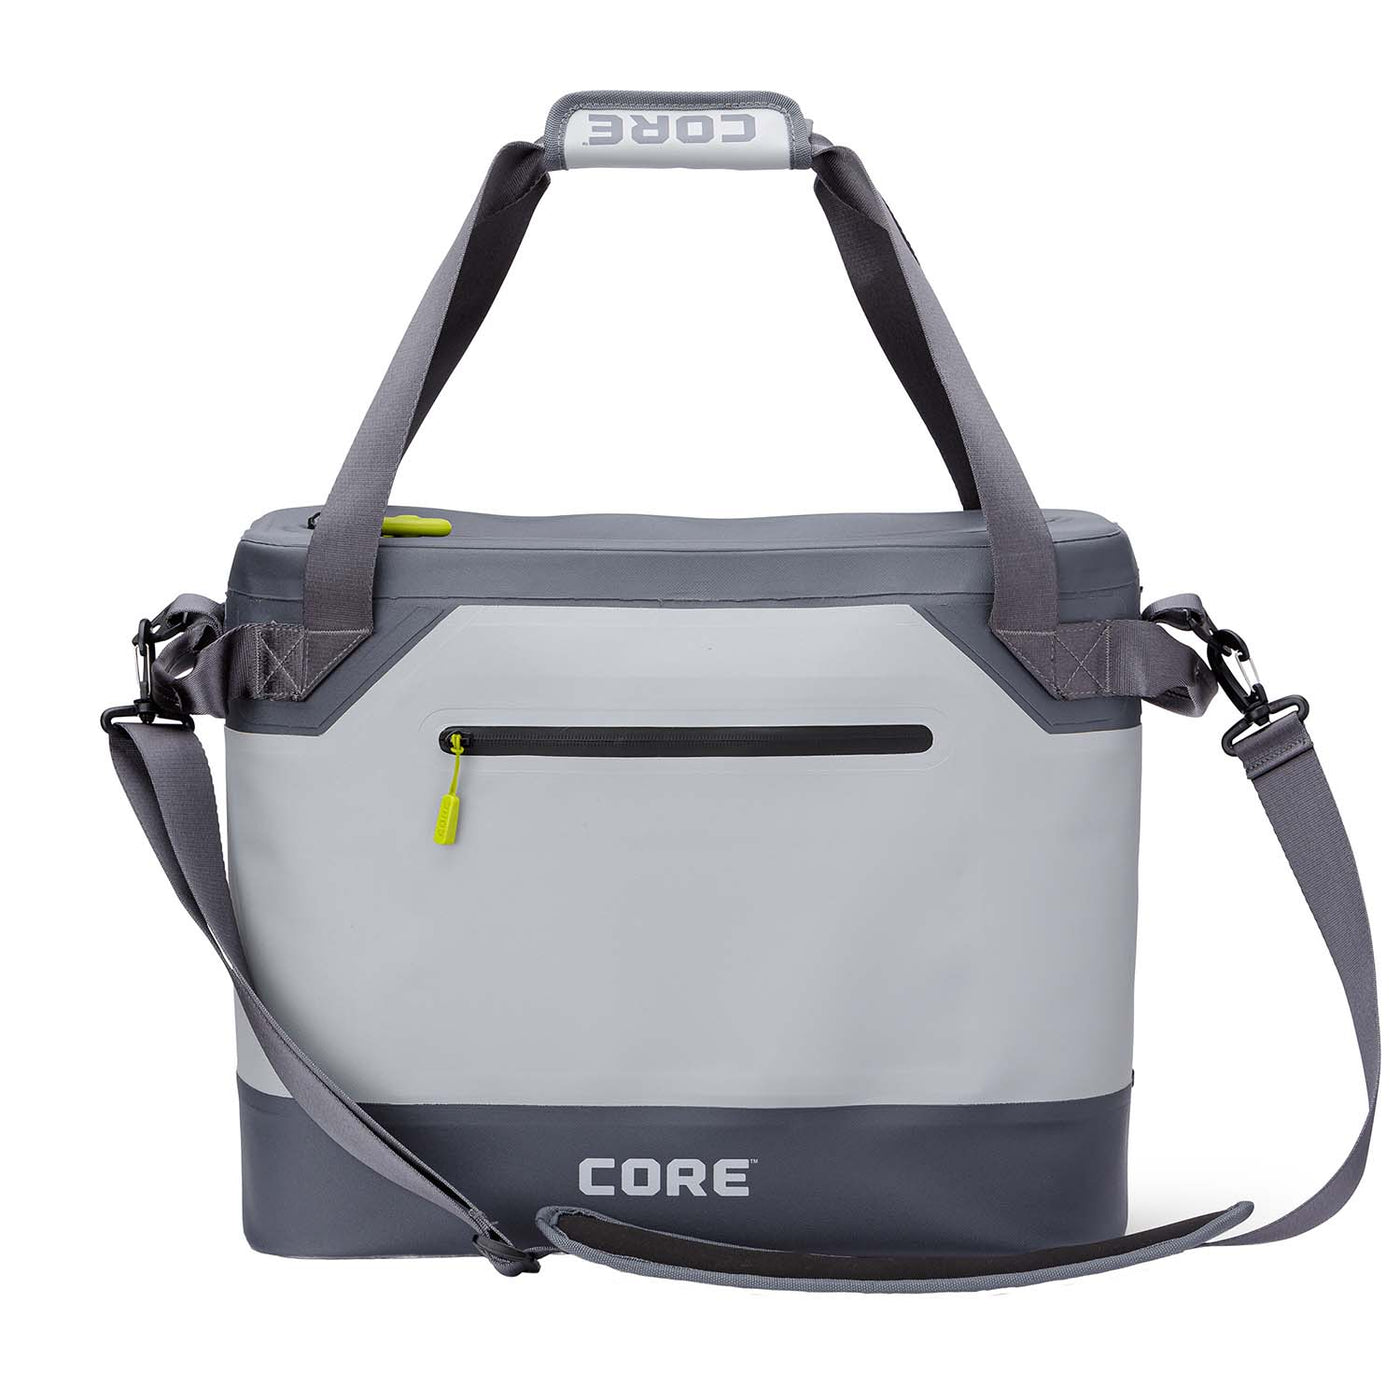 Choice Insulated Cooler Bag / Soft Cooler, Black Nylon